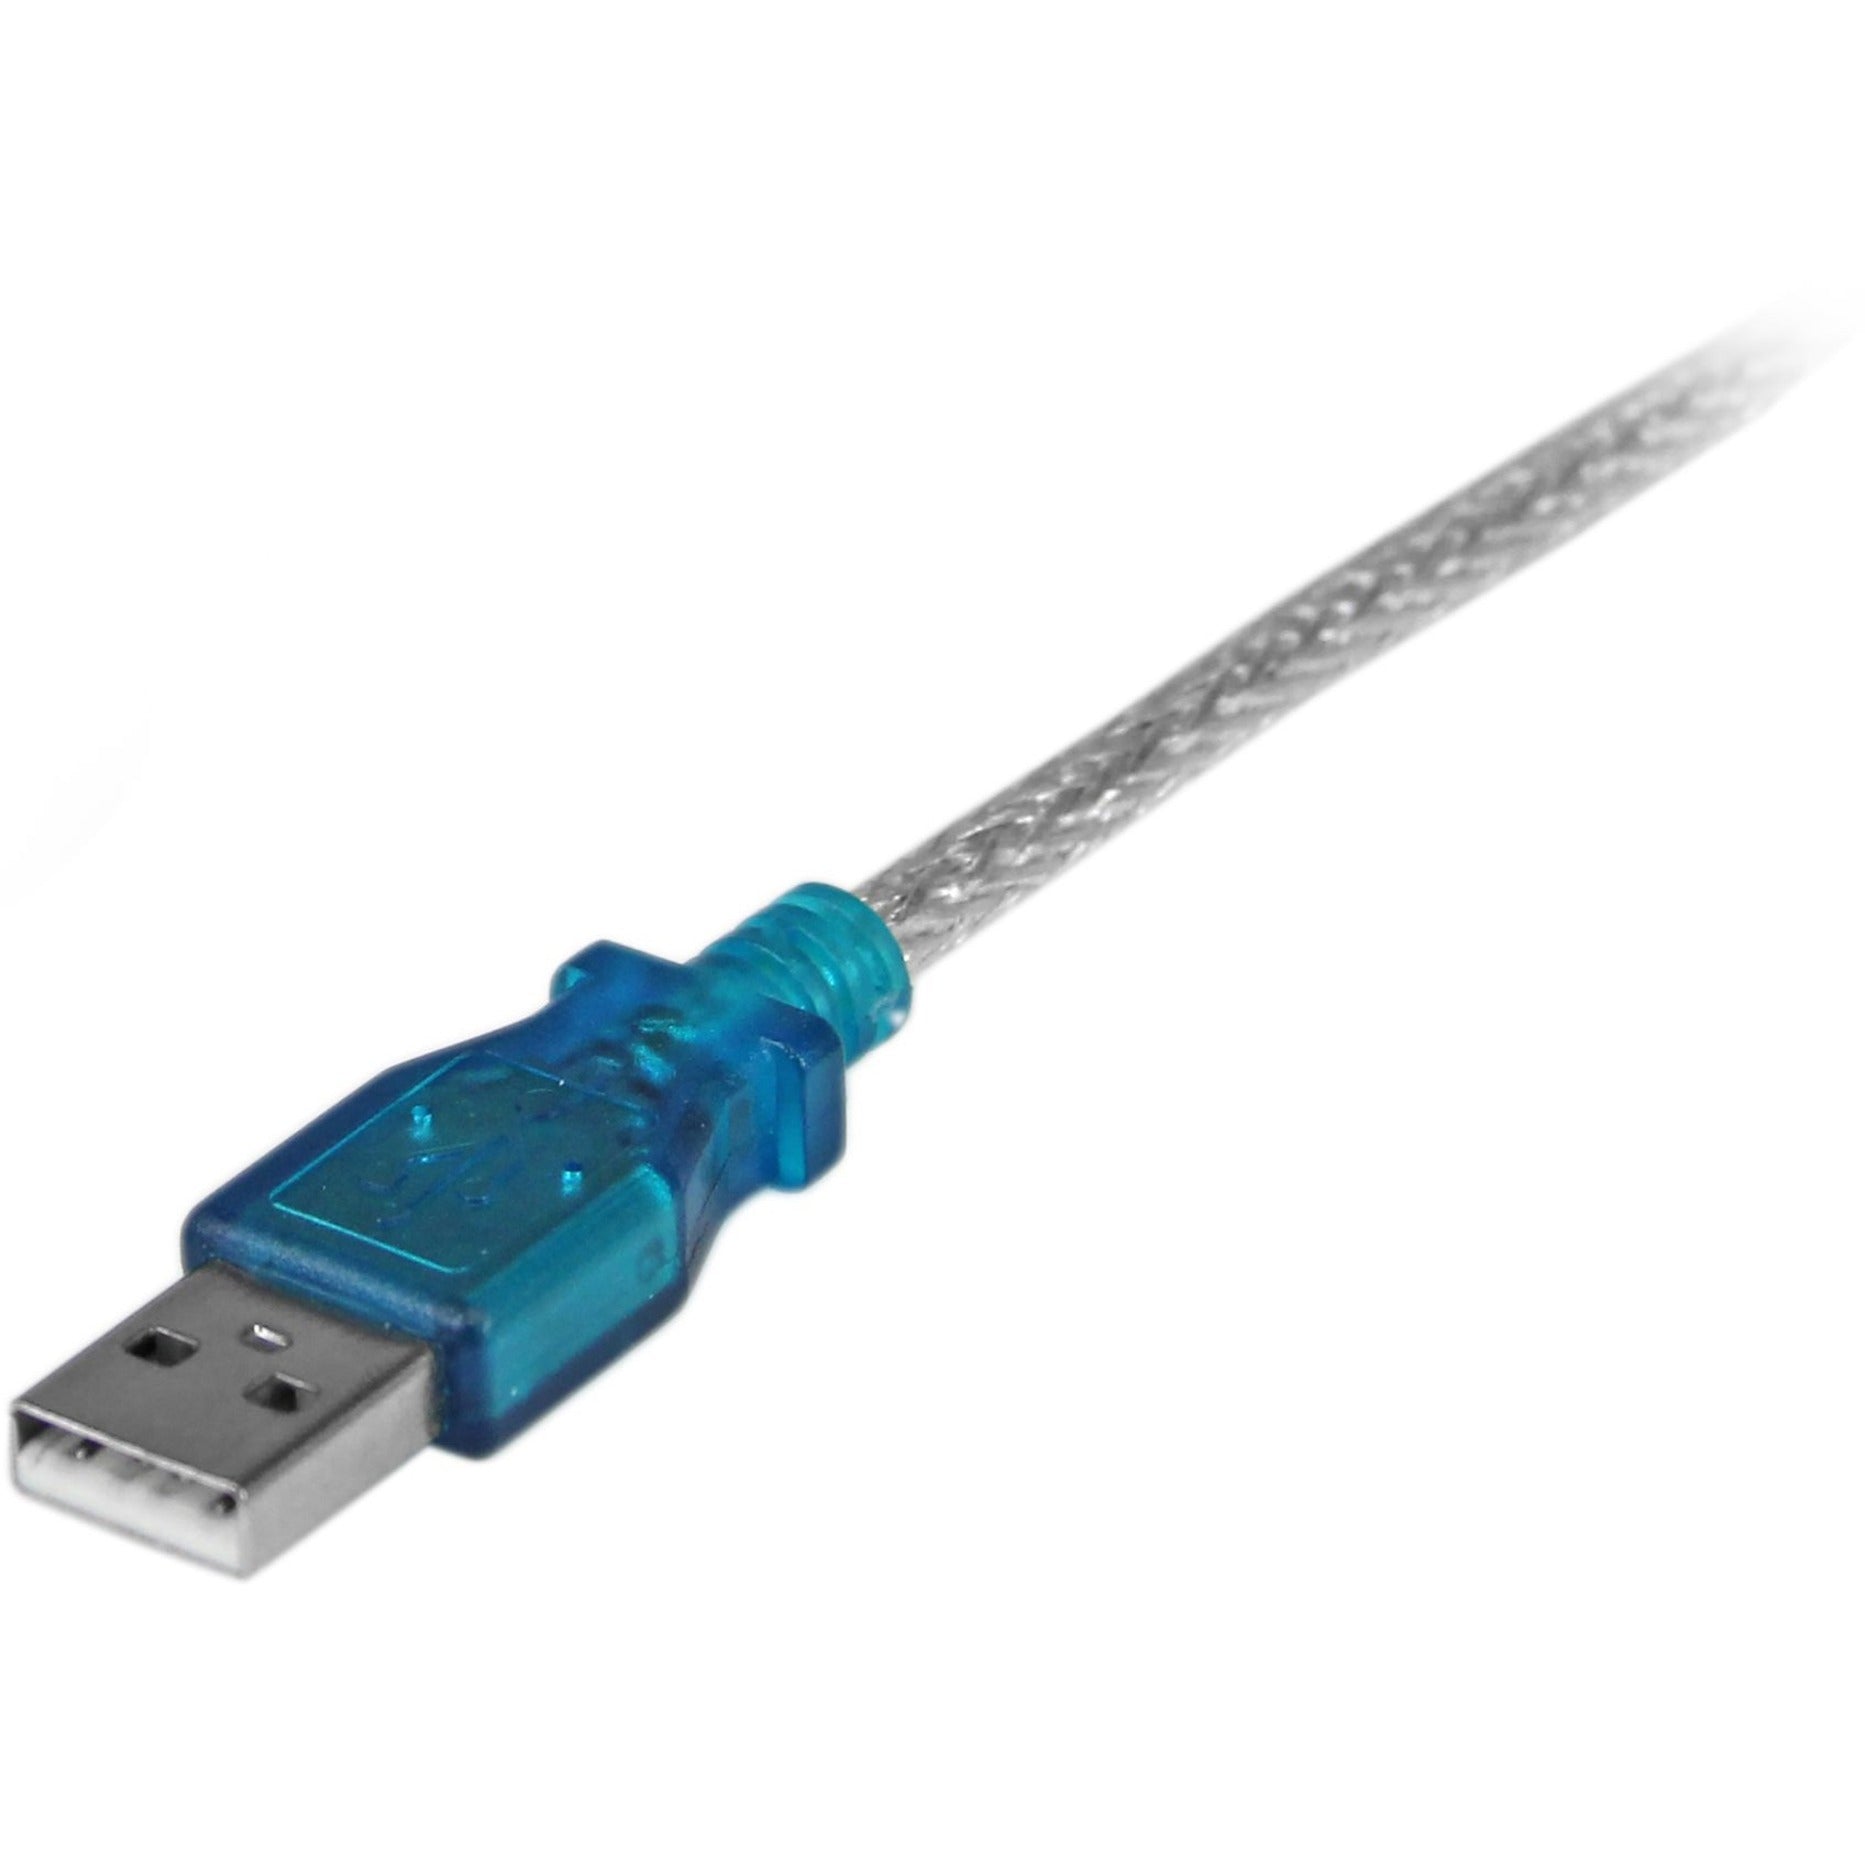 StarTech.com ICUSB232V2 1 Port USB to RS232 DB9 Serial Adapter Cable - M/M, Plug and Play, 3-Year Warranty